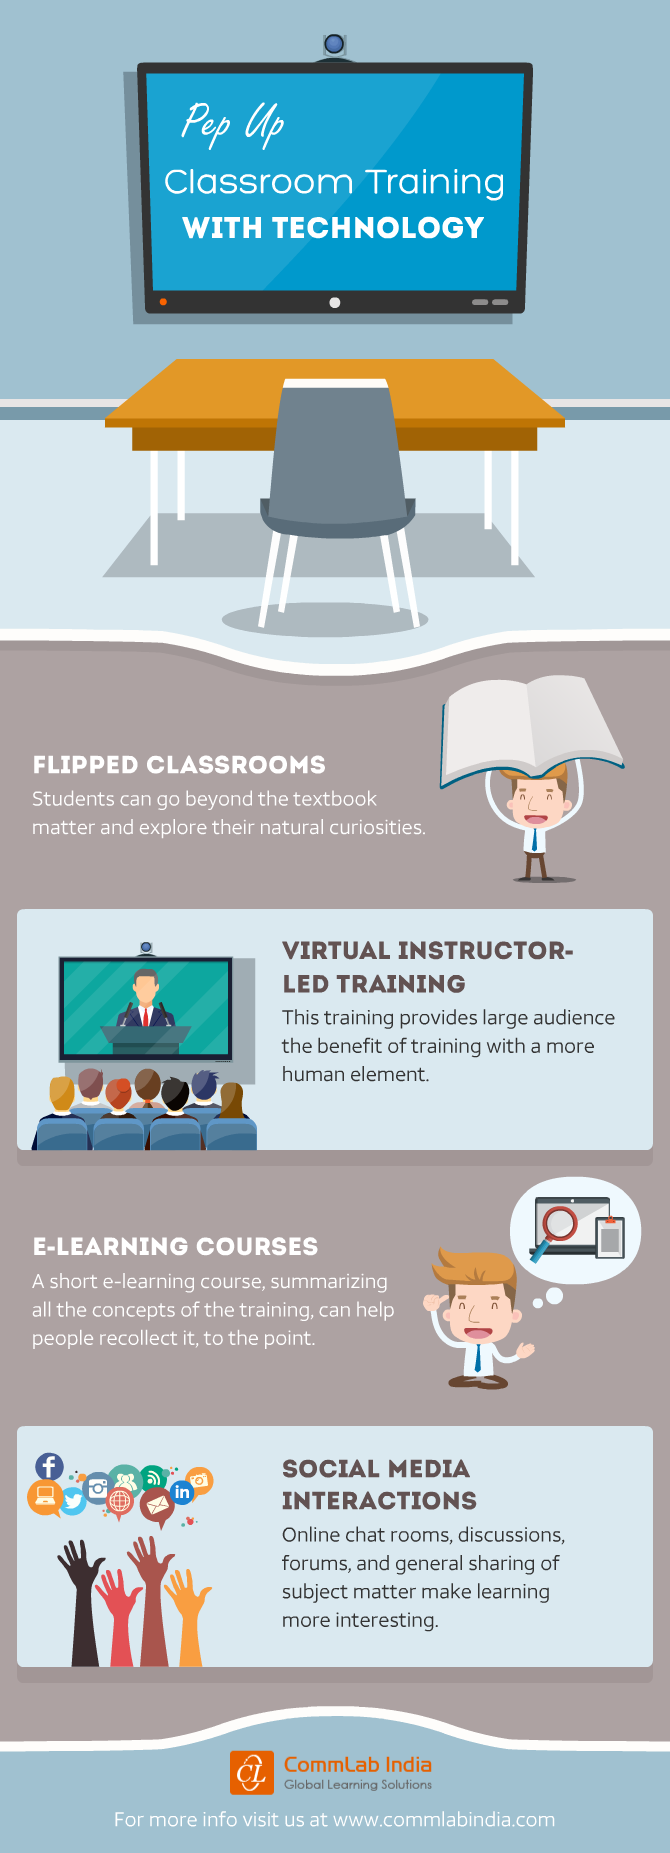 Pep Up Classroom Training with Technology [Infographic]